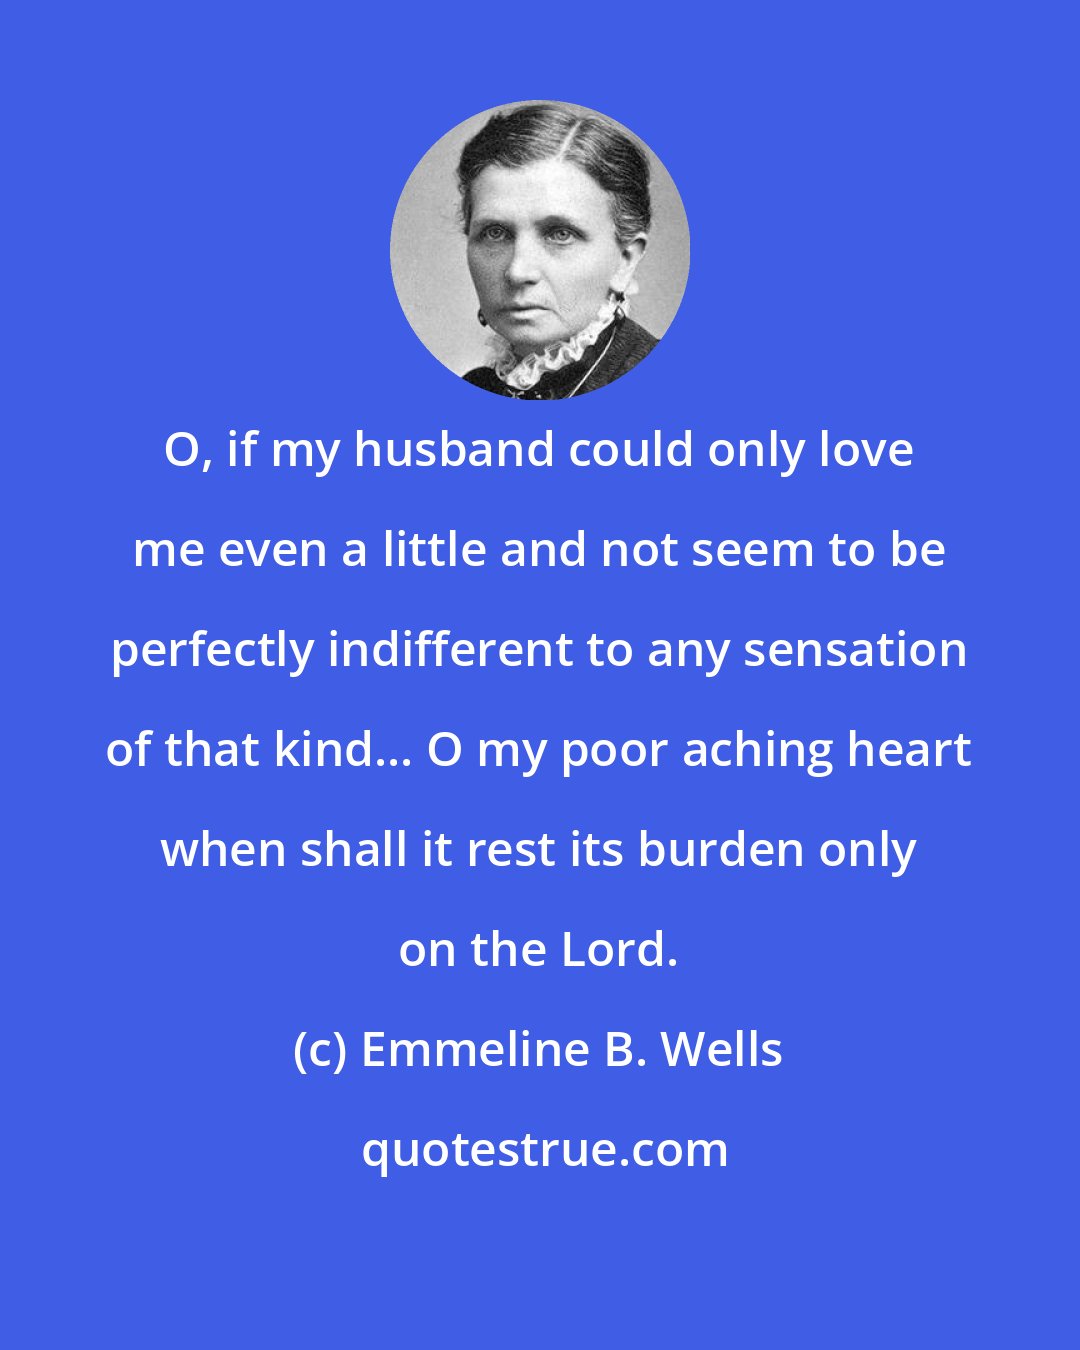 Emmeline B. Wells: O, if my husband could only love me even a little and not seem to be perfectly indifferent to any sensation of that kind... O my poor aching heart when shall it rest its burden only on the Lord.